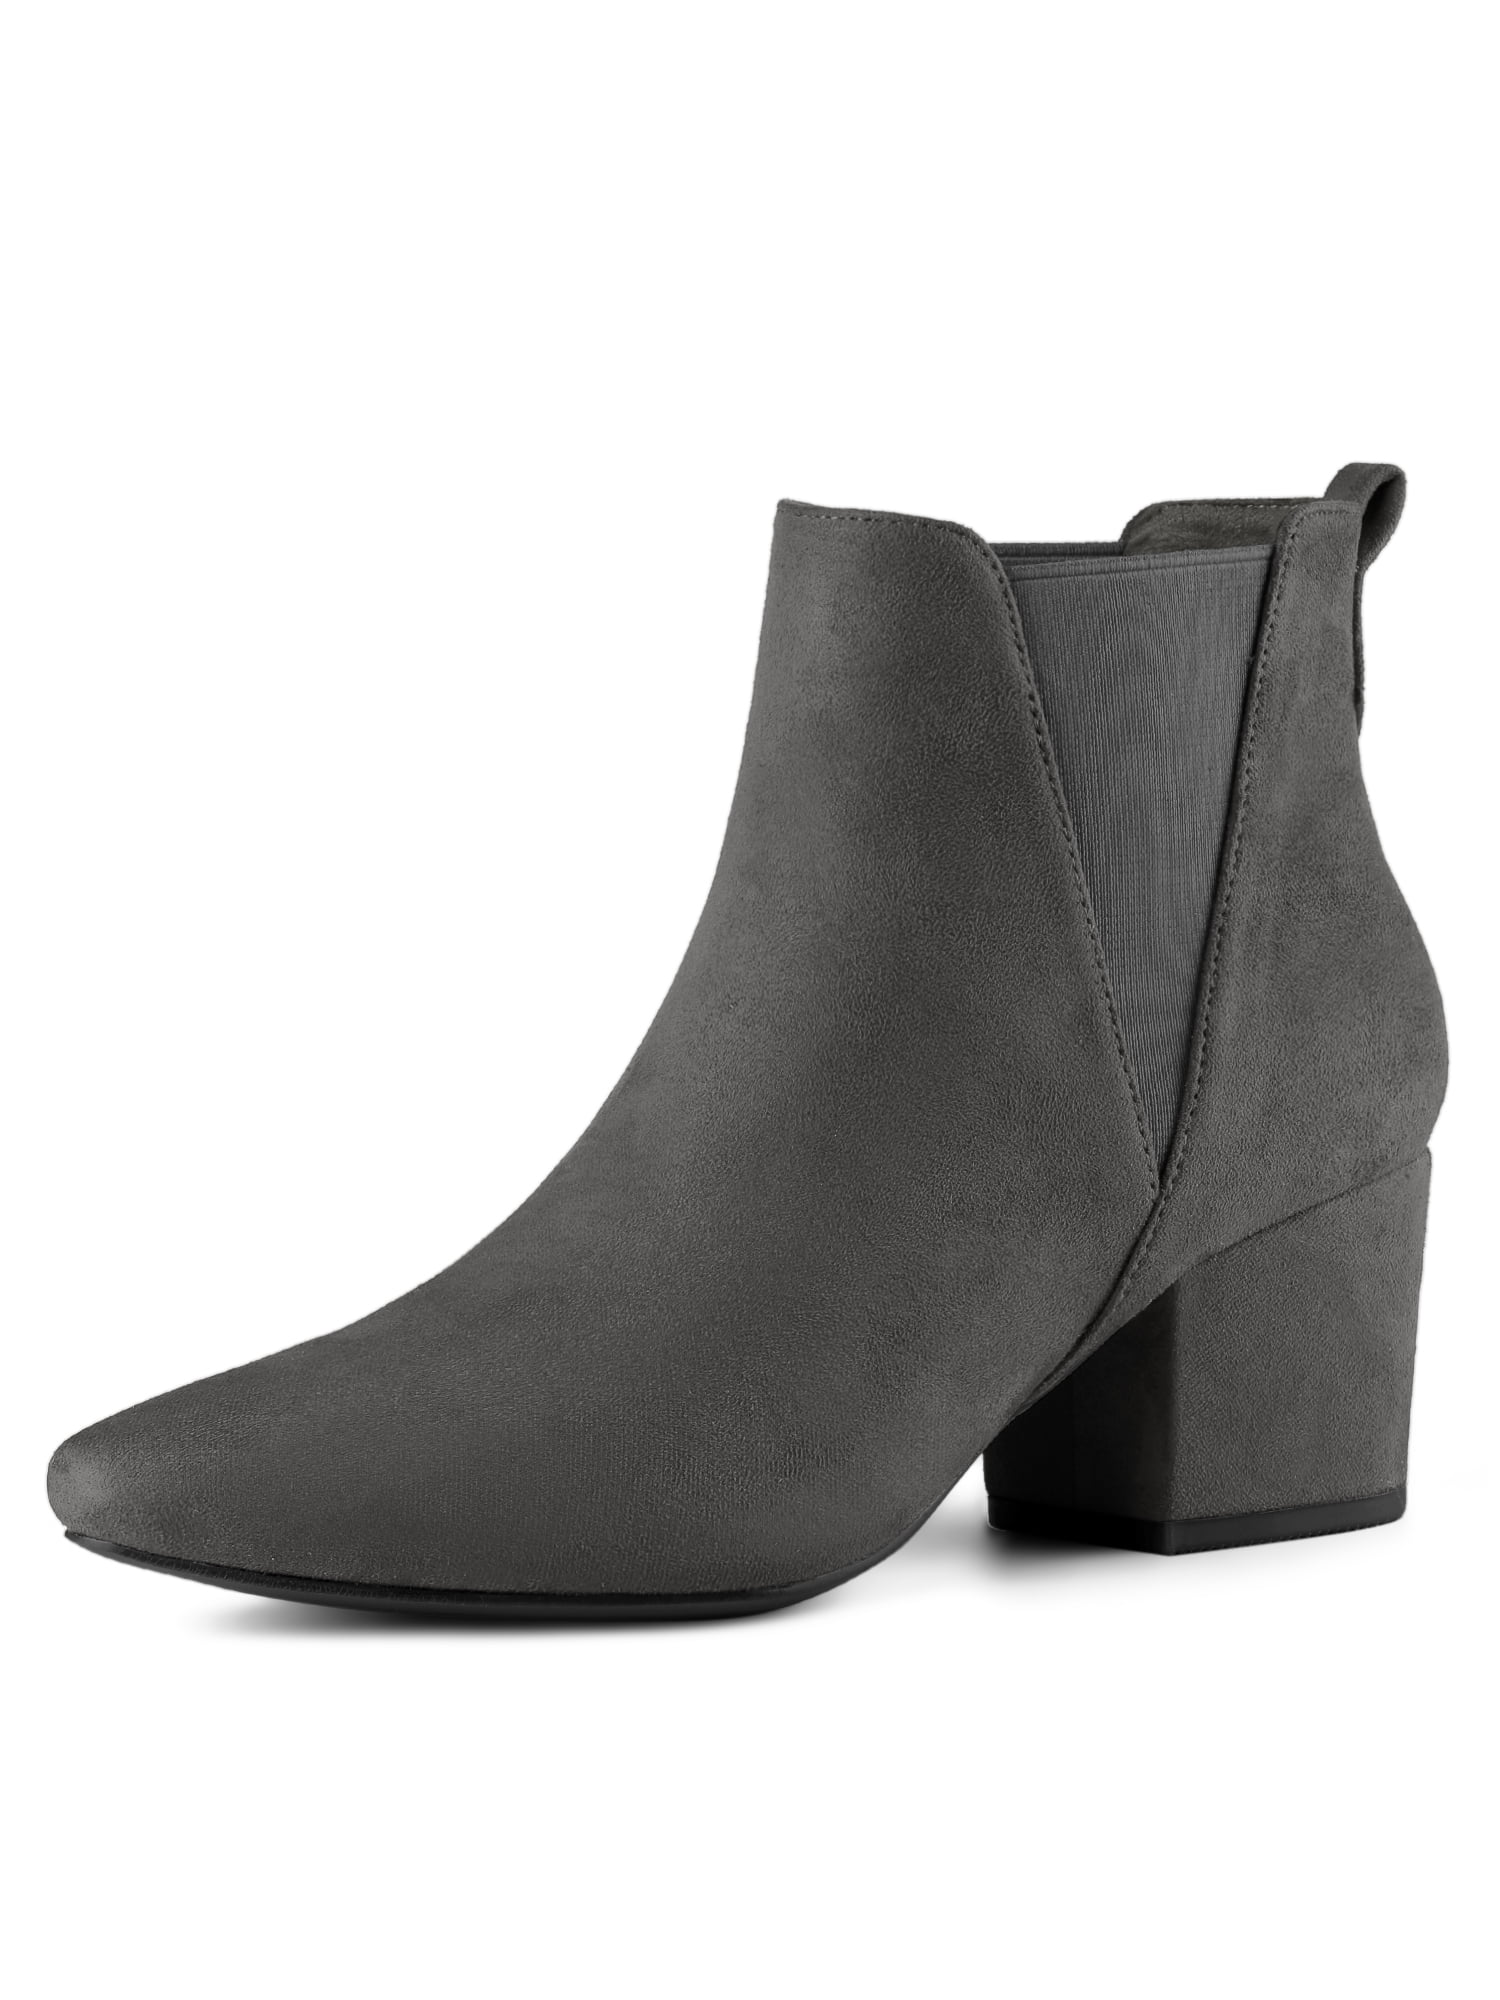 Ladies BLACK Faux Suede & Patent Pull On Chelsea Boots Boxed Sizes 3-8 x 